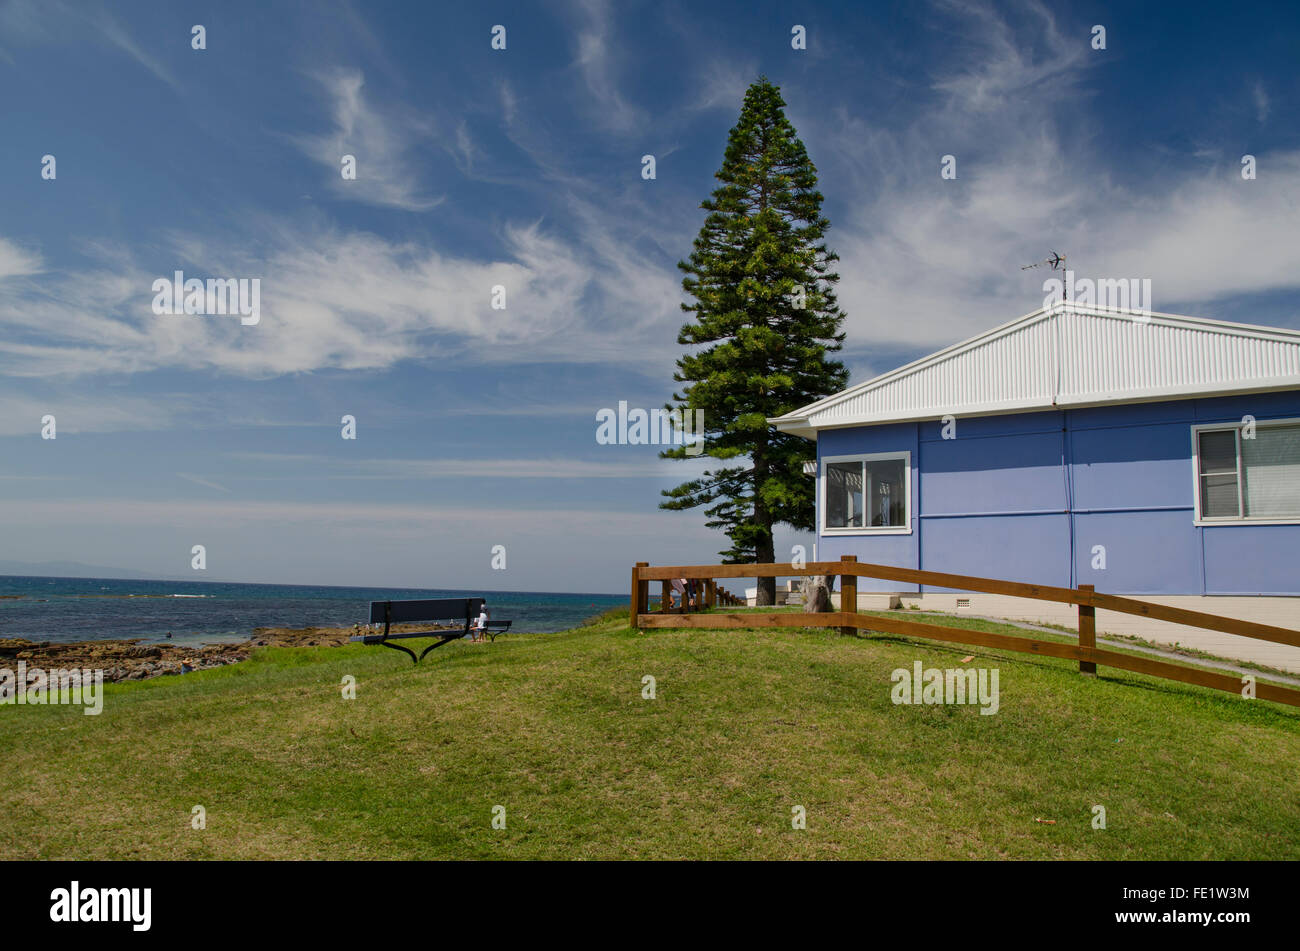 A small fibro ( asbestos cement ) cottage overlooking the ocean at the small town of Currarong on the New South Wales south coast in Australia Stock Photo